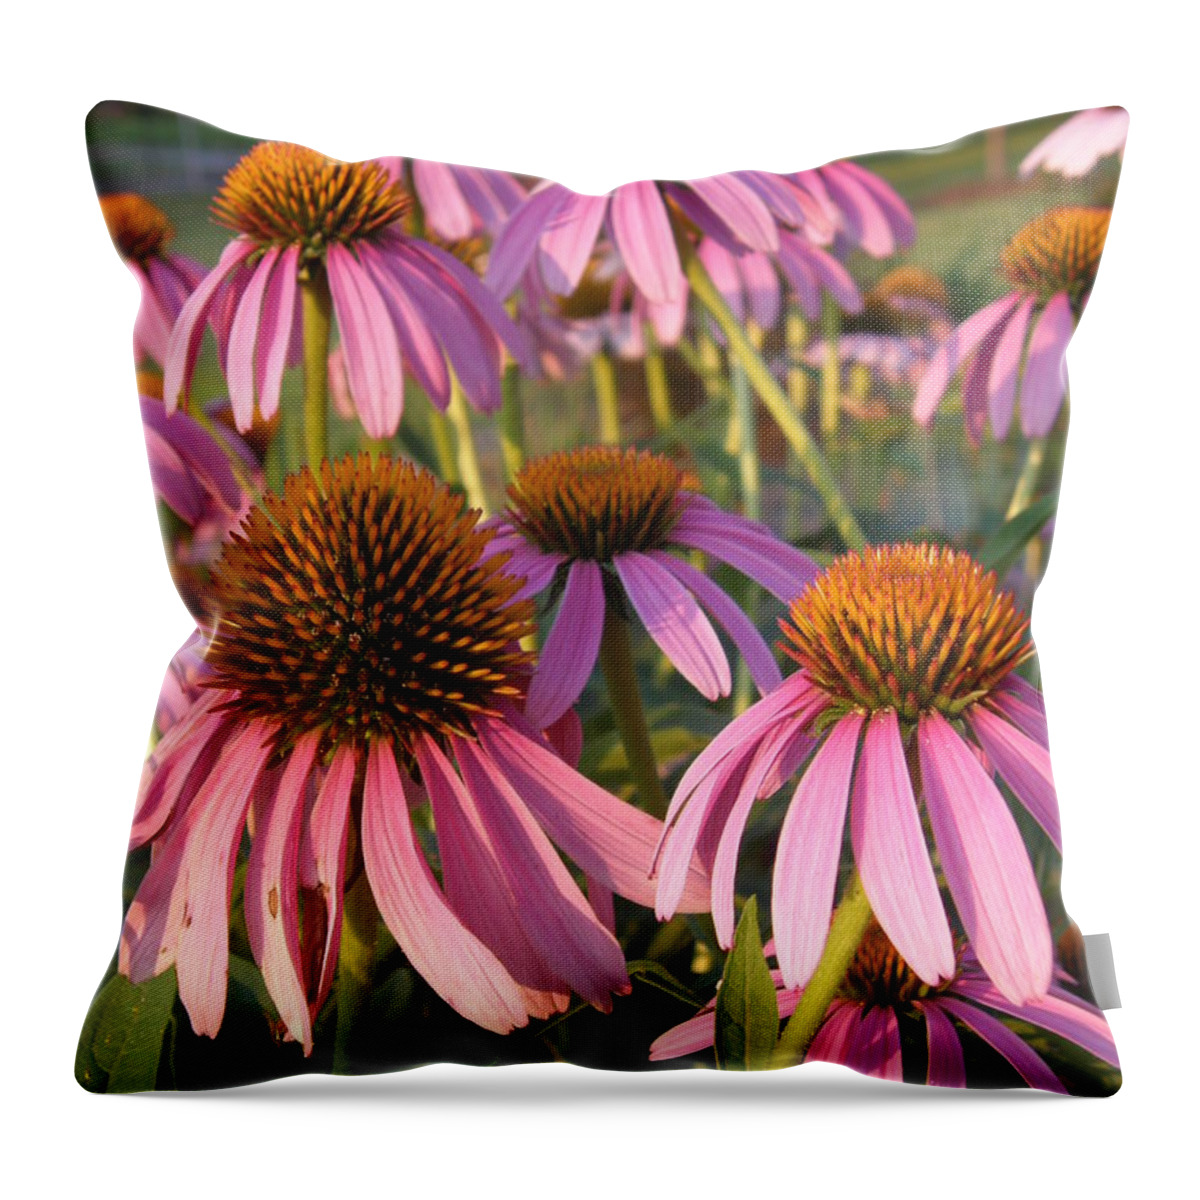 Bee Throw Pillow featuring the photograph Coneflowers by Caryl J Bohn